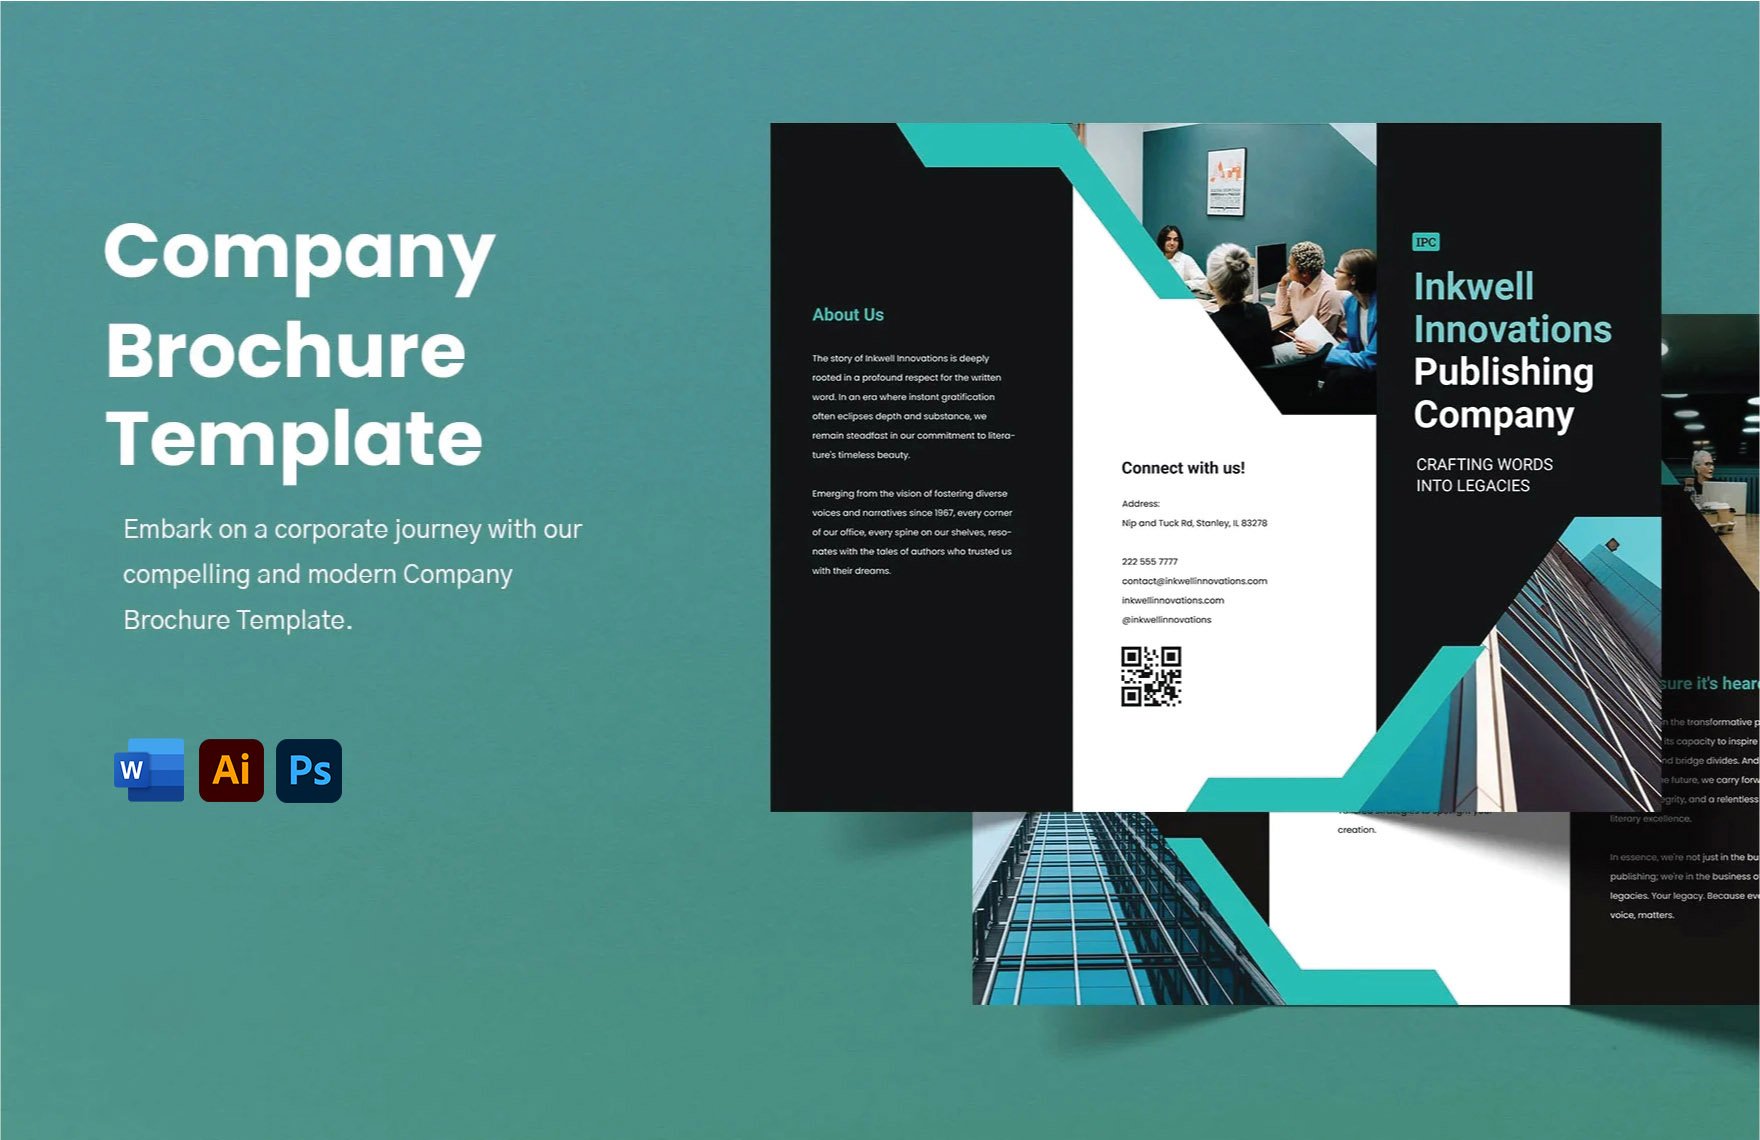 Free Company Brochure Template in Word, Illustrator, PSD